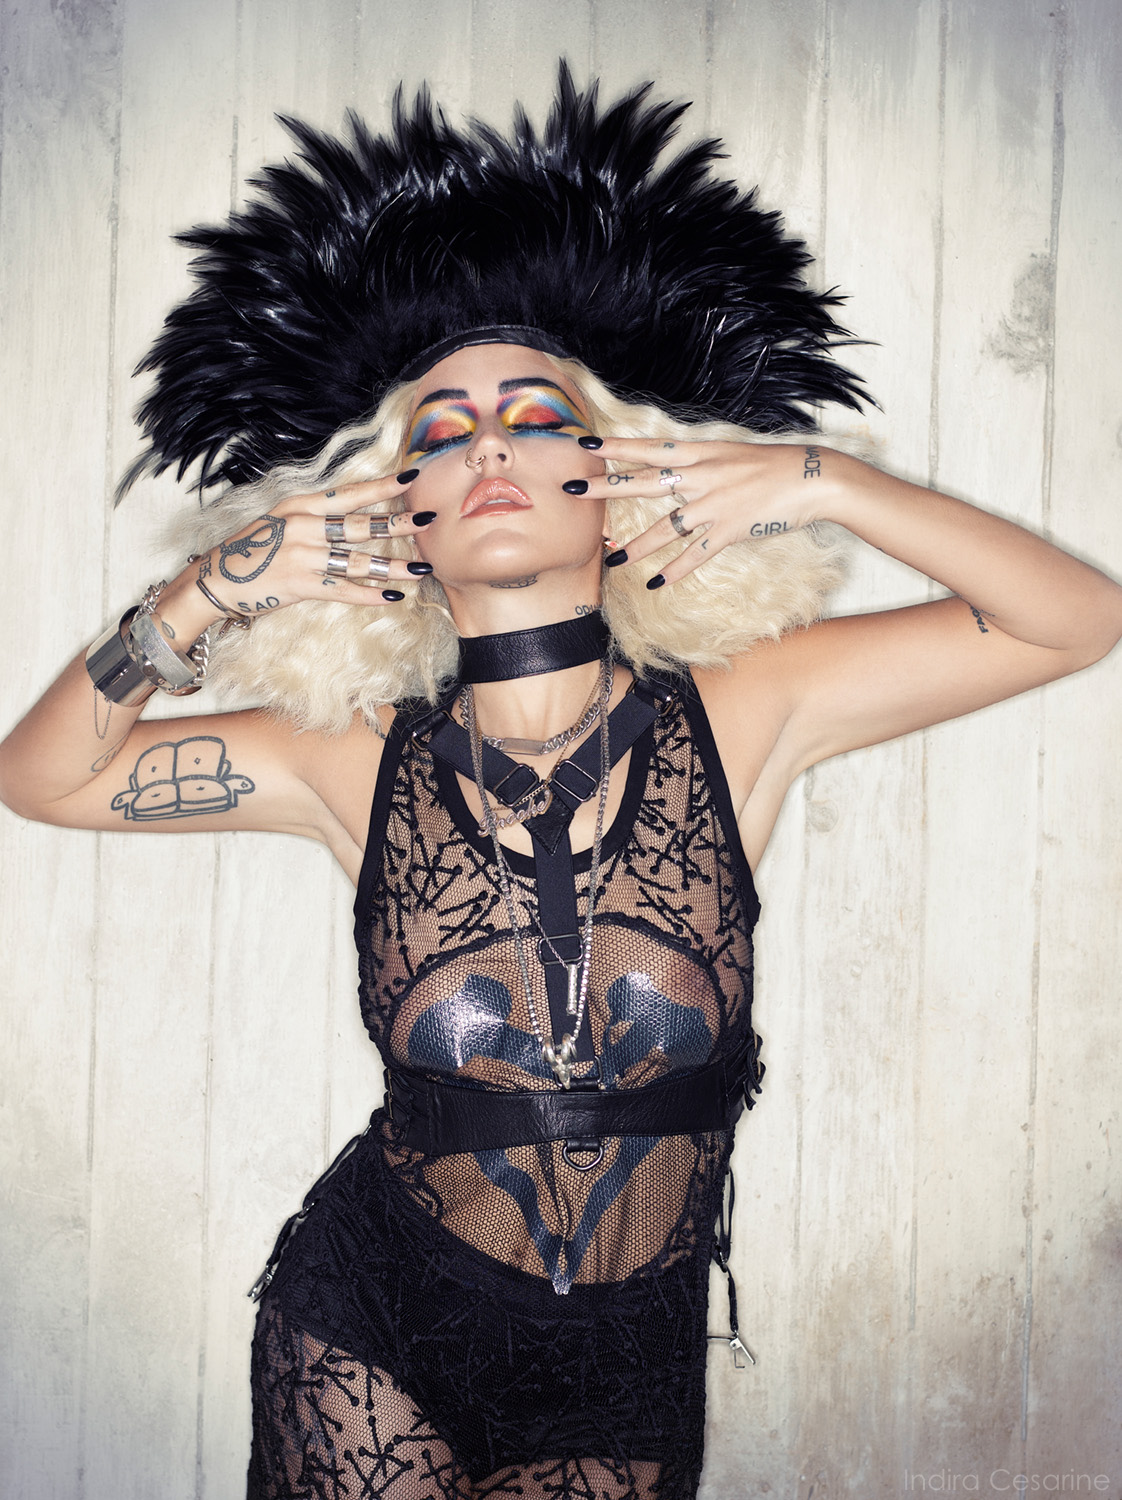 Brooke-Candy-Photography-by-Indira-Cesarine-016.jpg